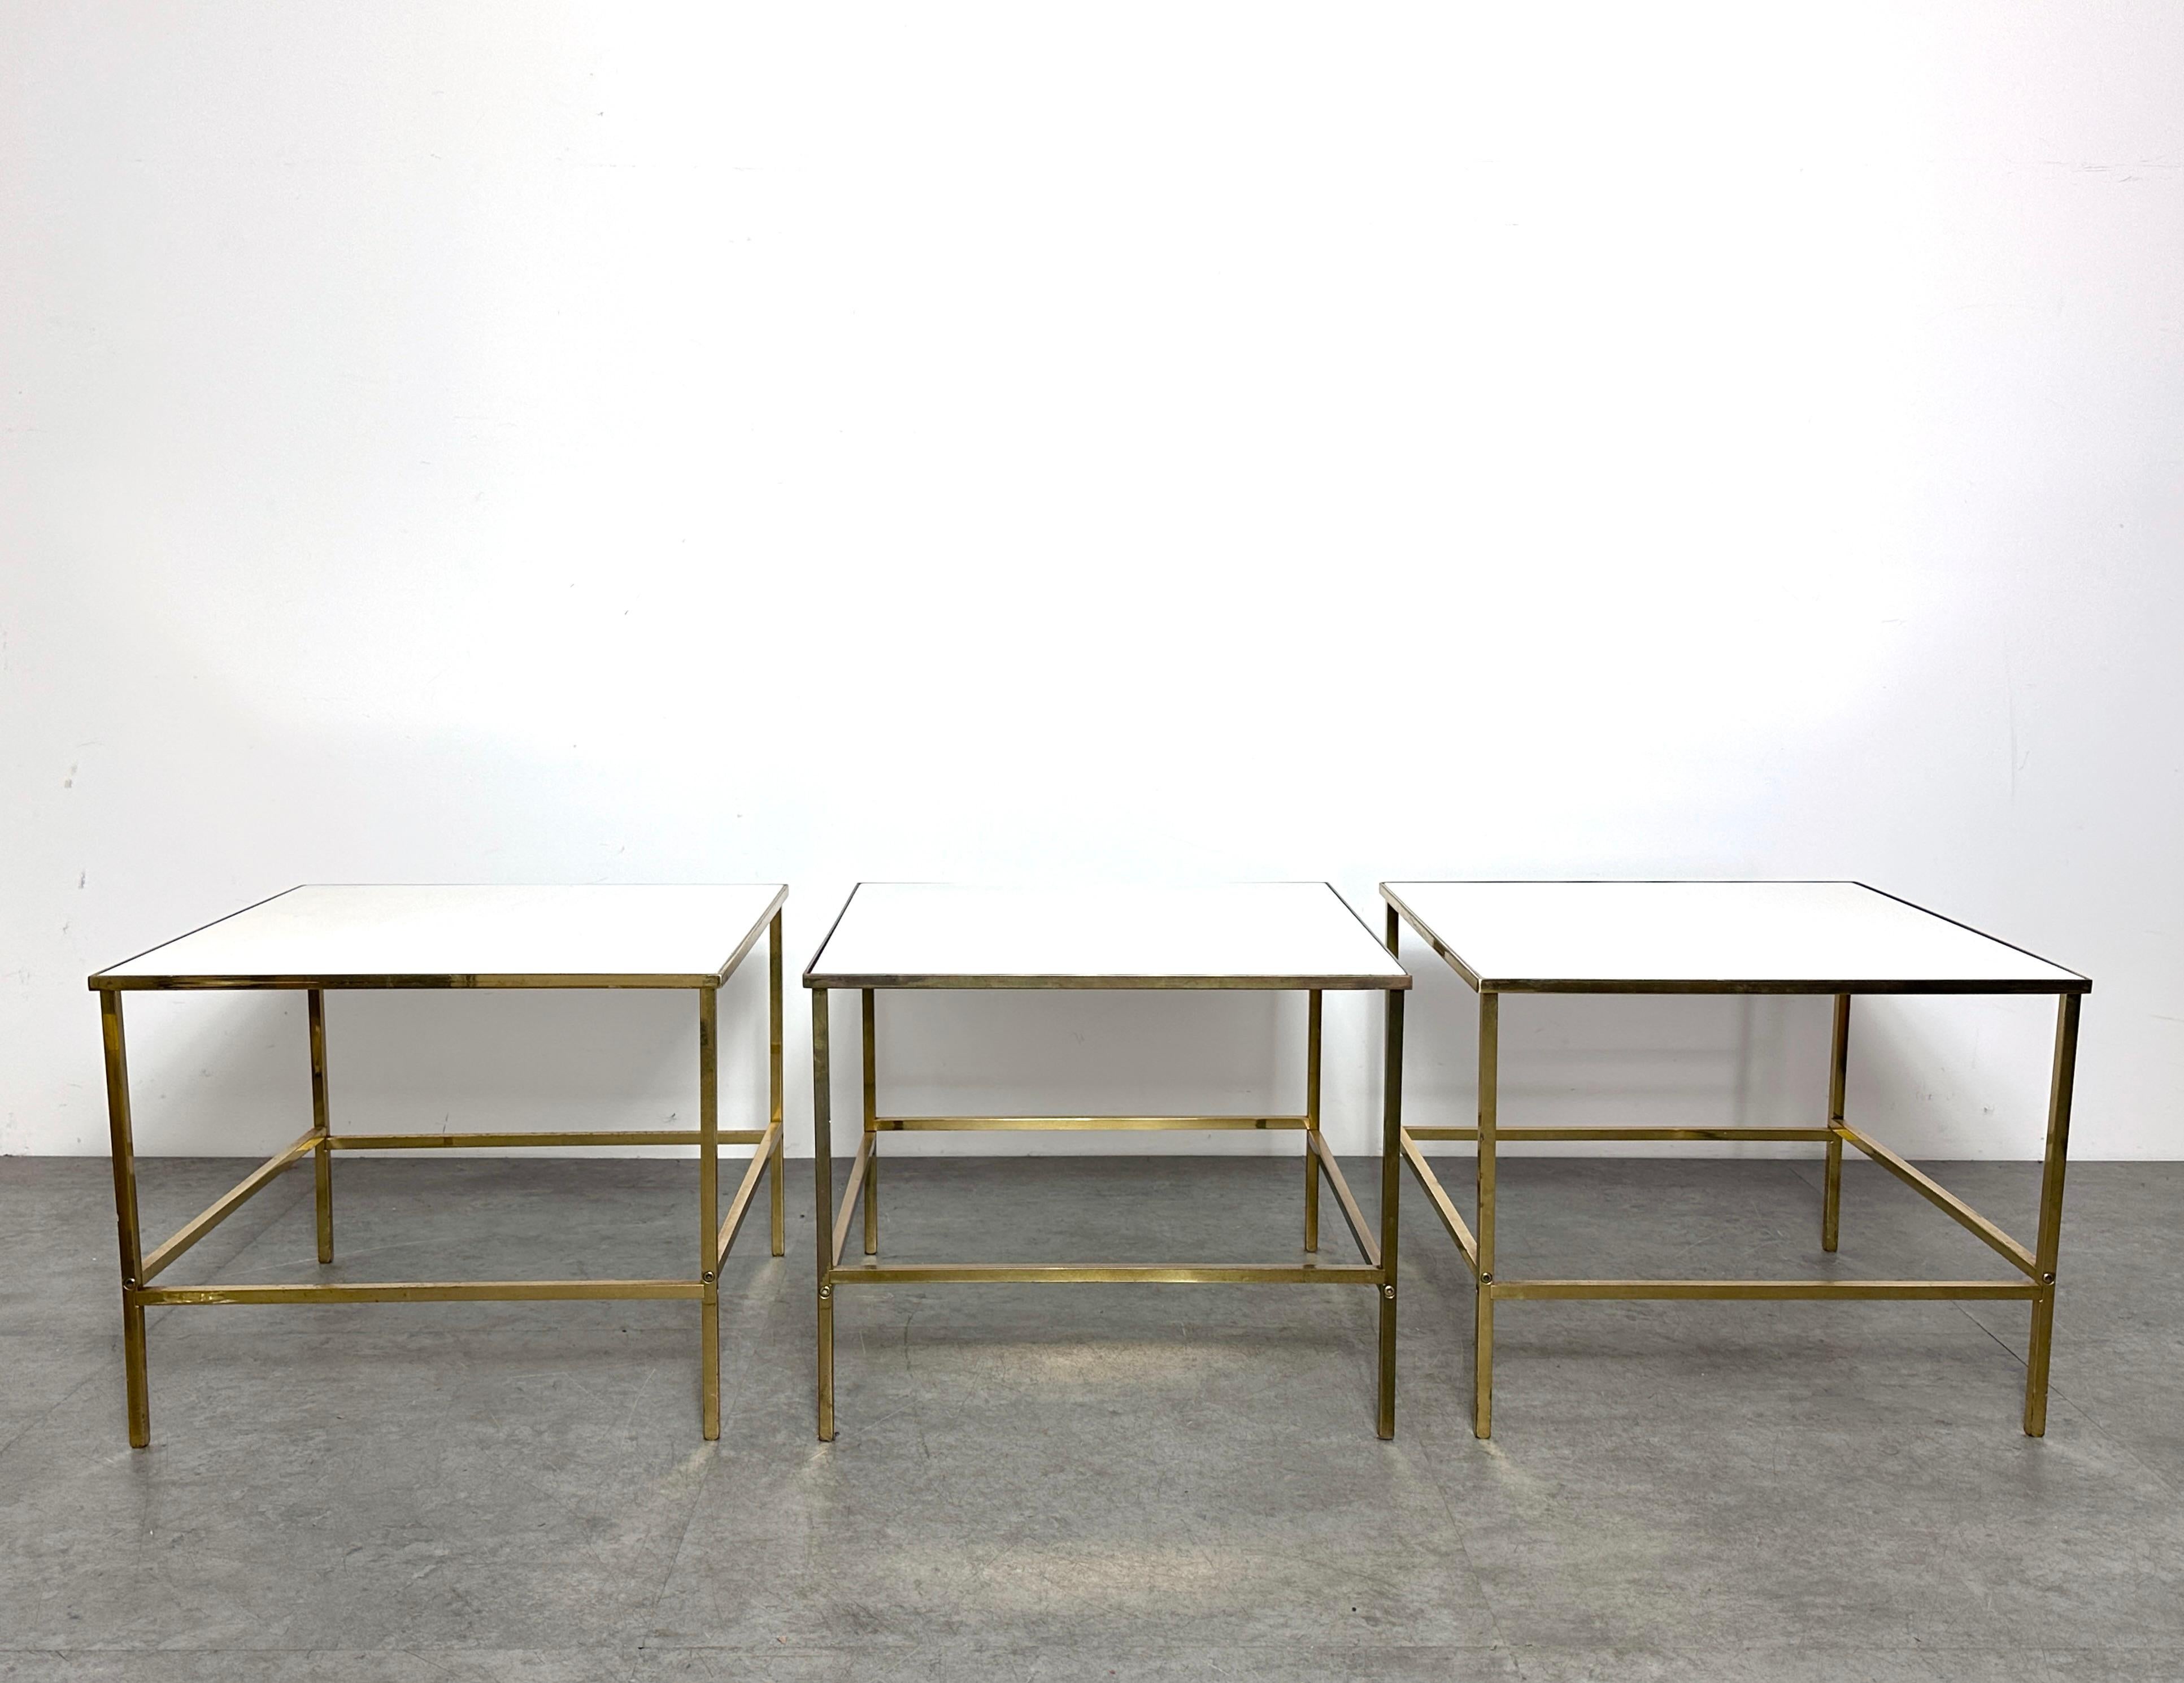 Three matching square side tables or modular coffee table by Harvey Probber circa 1950s

Elegant and clean design with solid brass frames and inset Vitrolite surfaces
Suitable as side tables or placed together as a cocktail table

Please inquire for